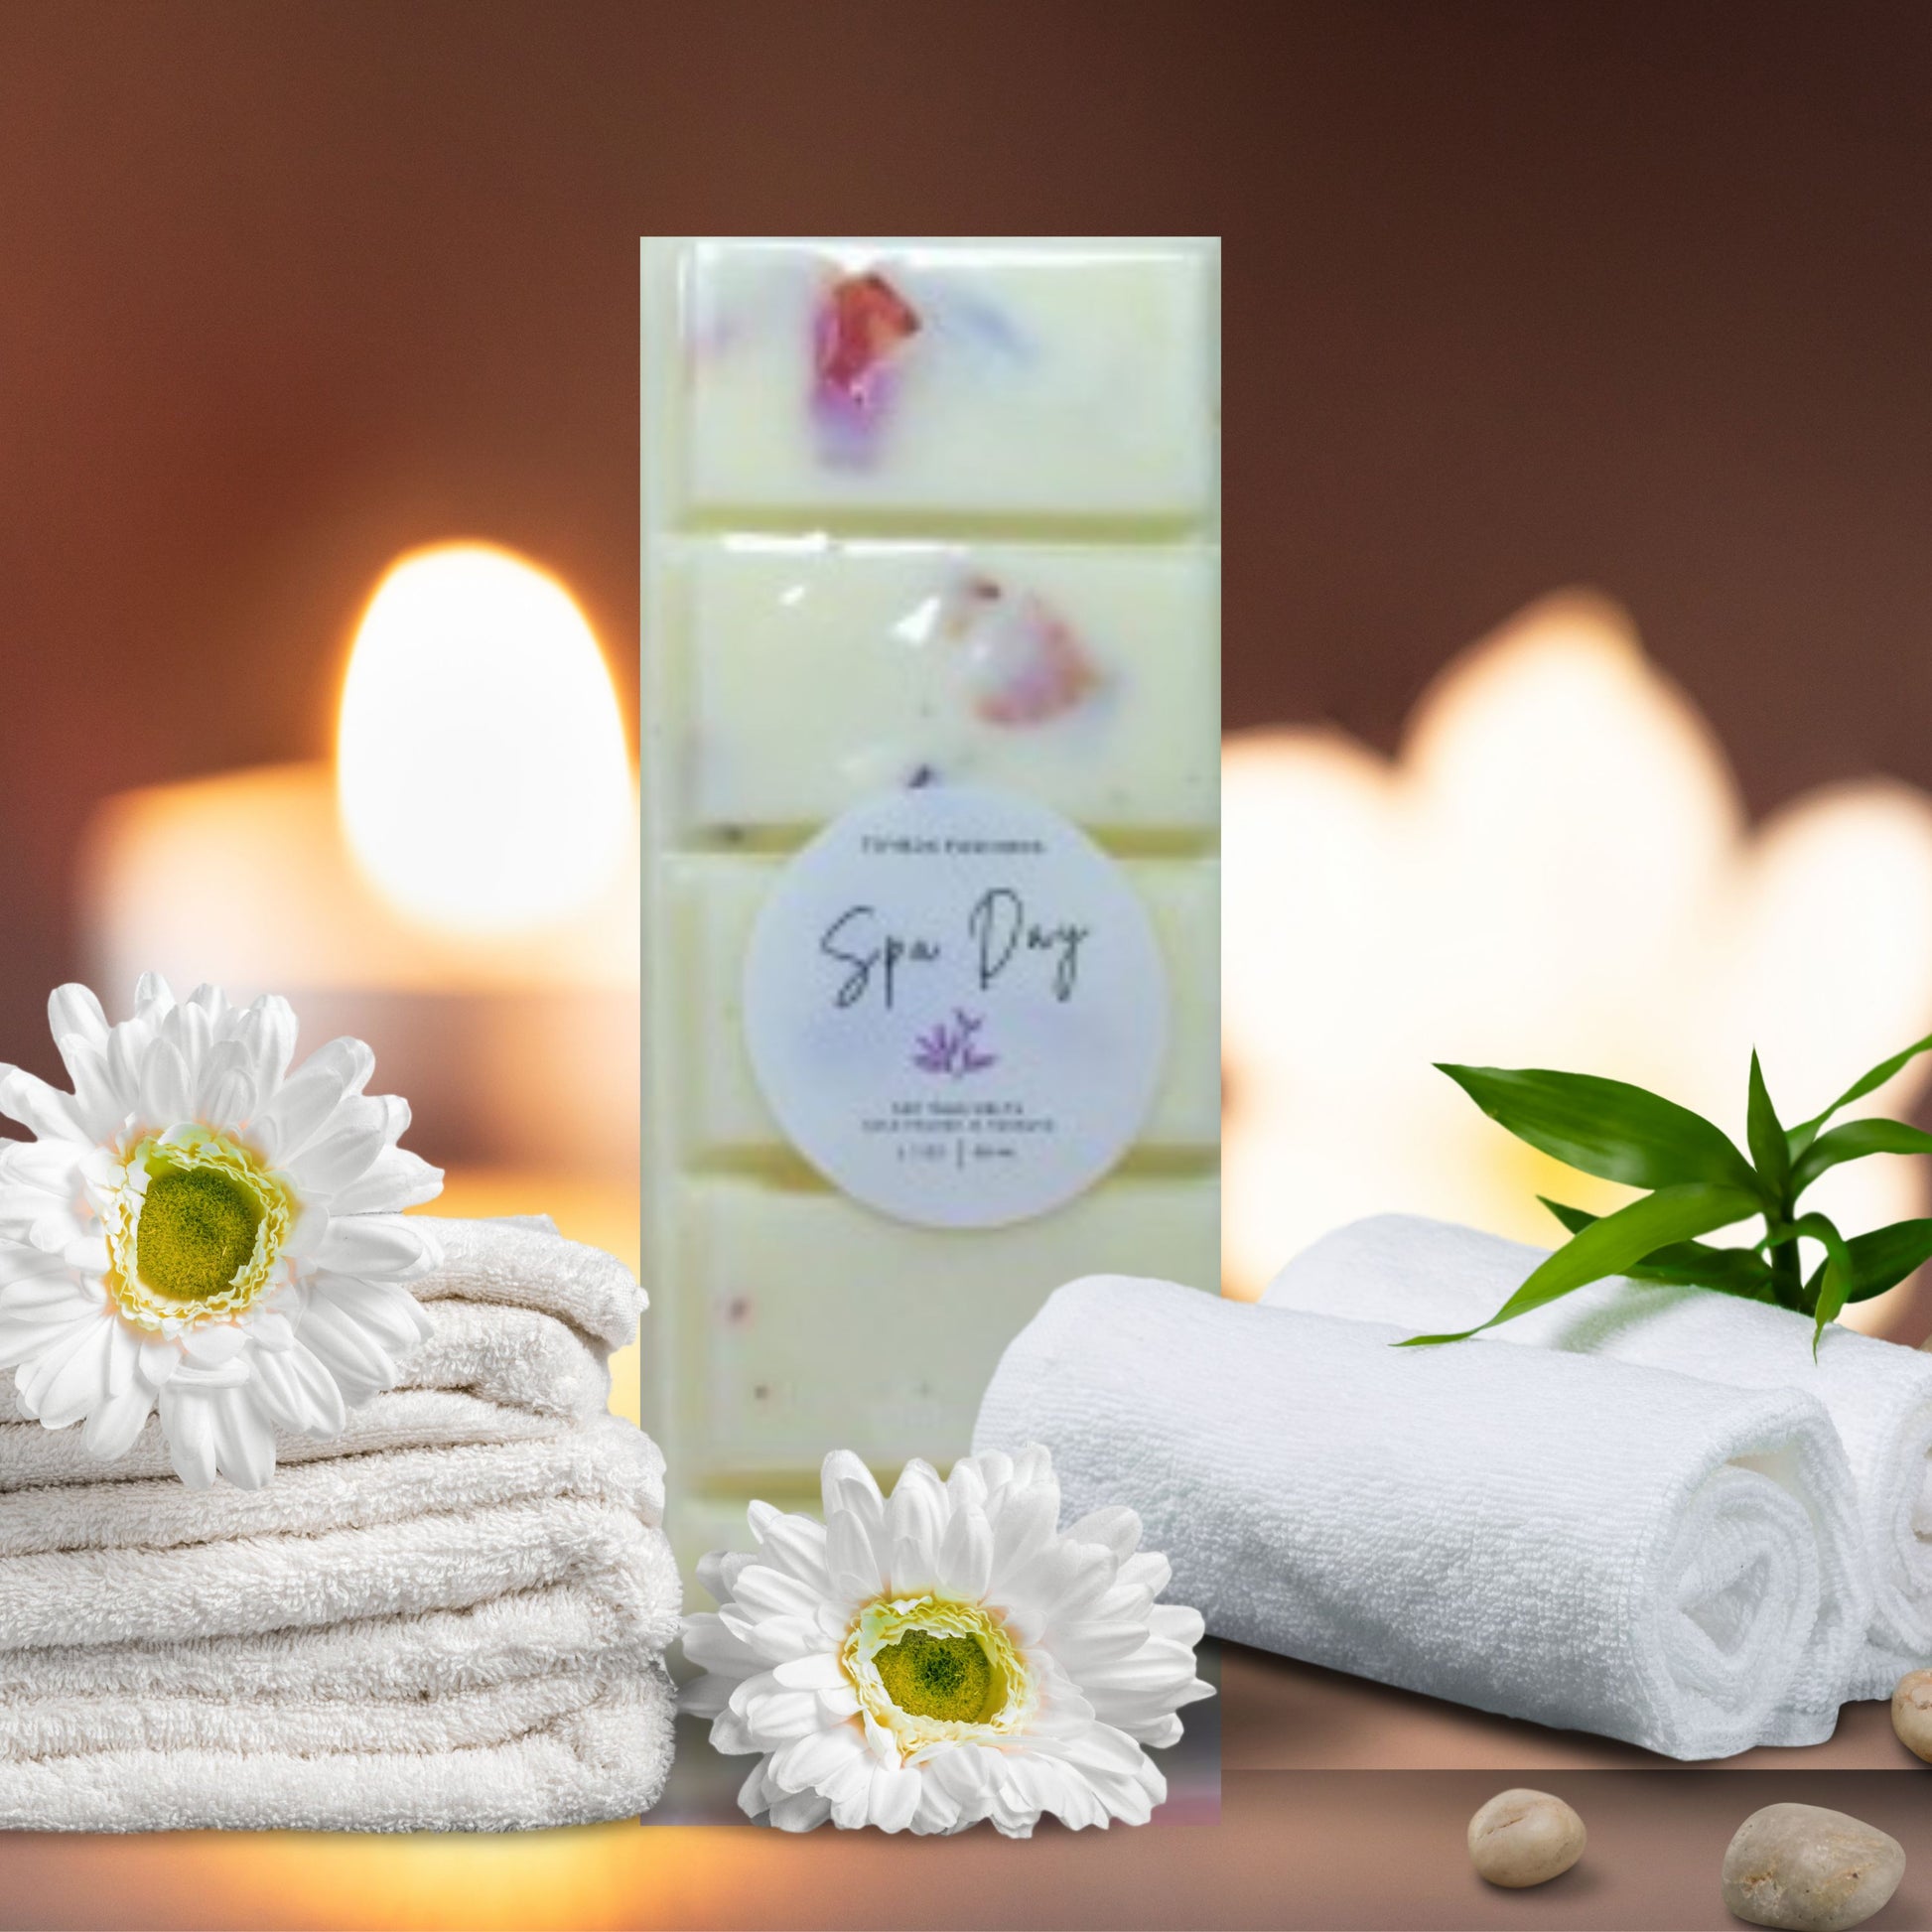 Spa Day All Summer Long Scented Soy Wax Melt Bars